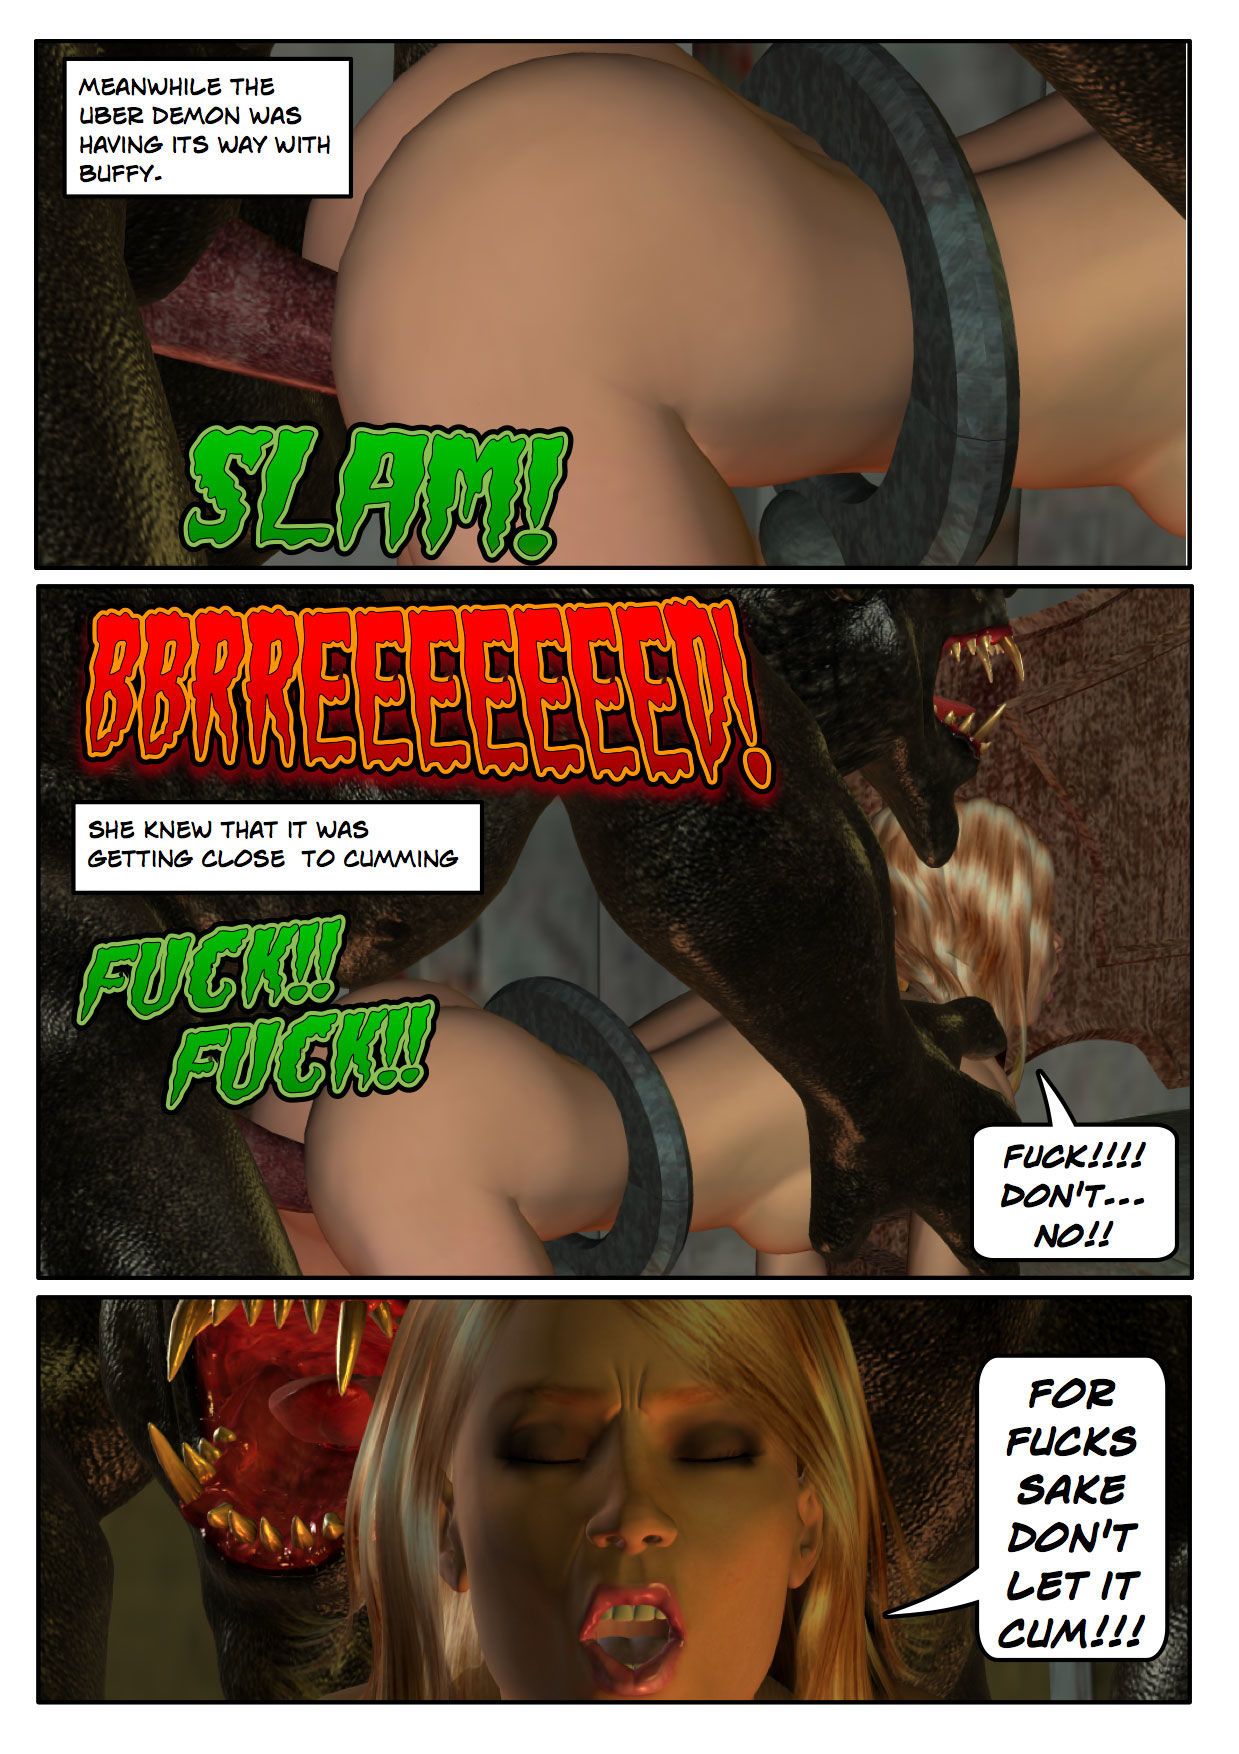 Slayer Issue 17 - part 2